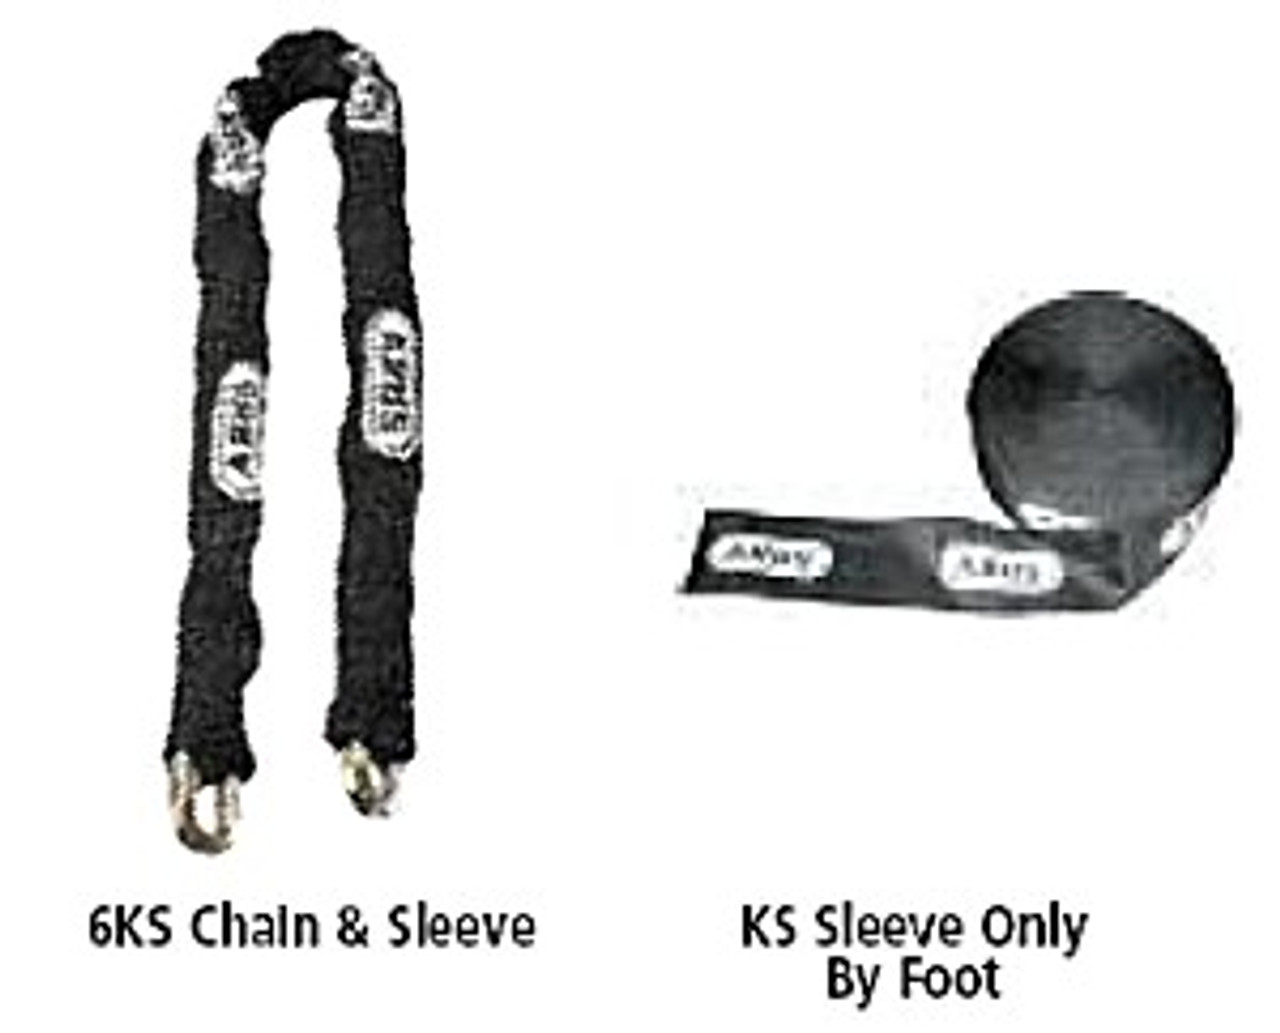 Abus 00706 8KS Chain Sleeve, Sold by the foot